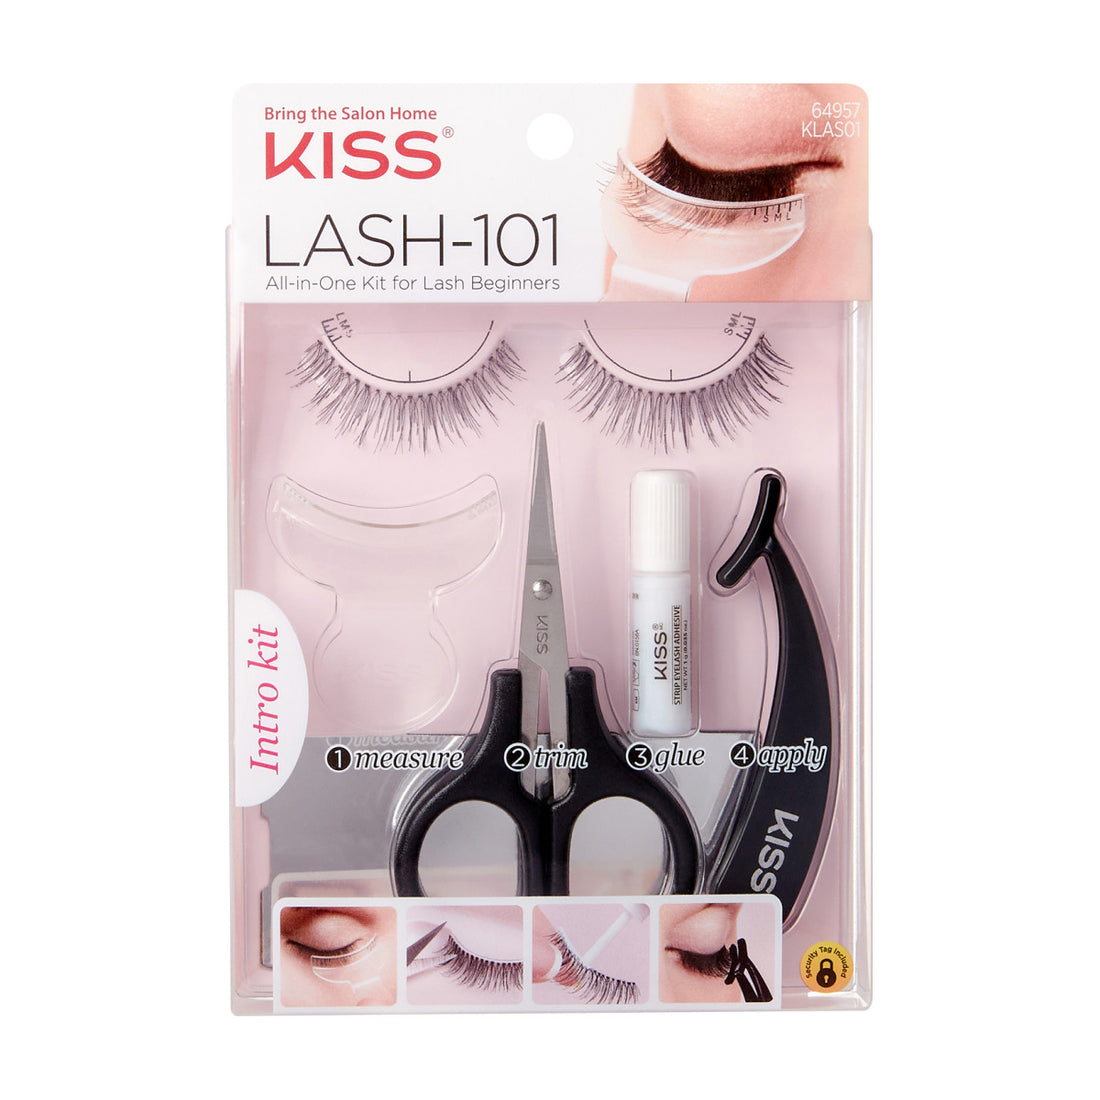 KISS LASH-101 All-In-One False Eyelashes Kit for Beginners, 1 Pair &amp; 4 Accessories